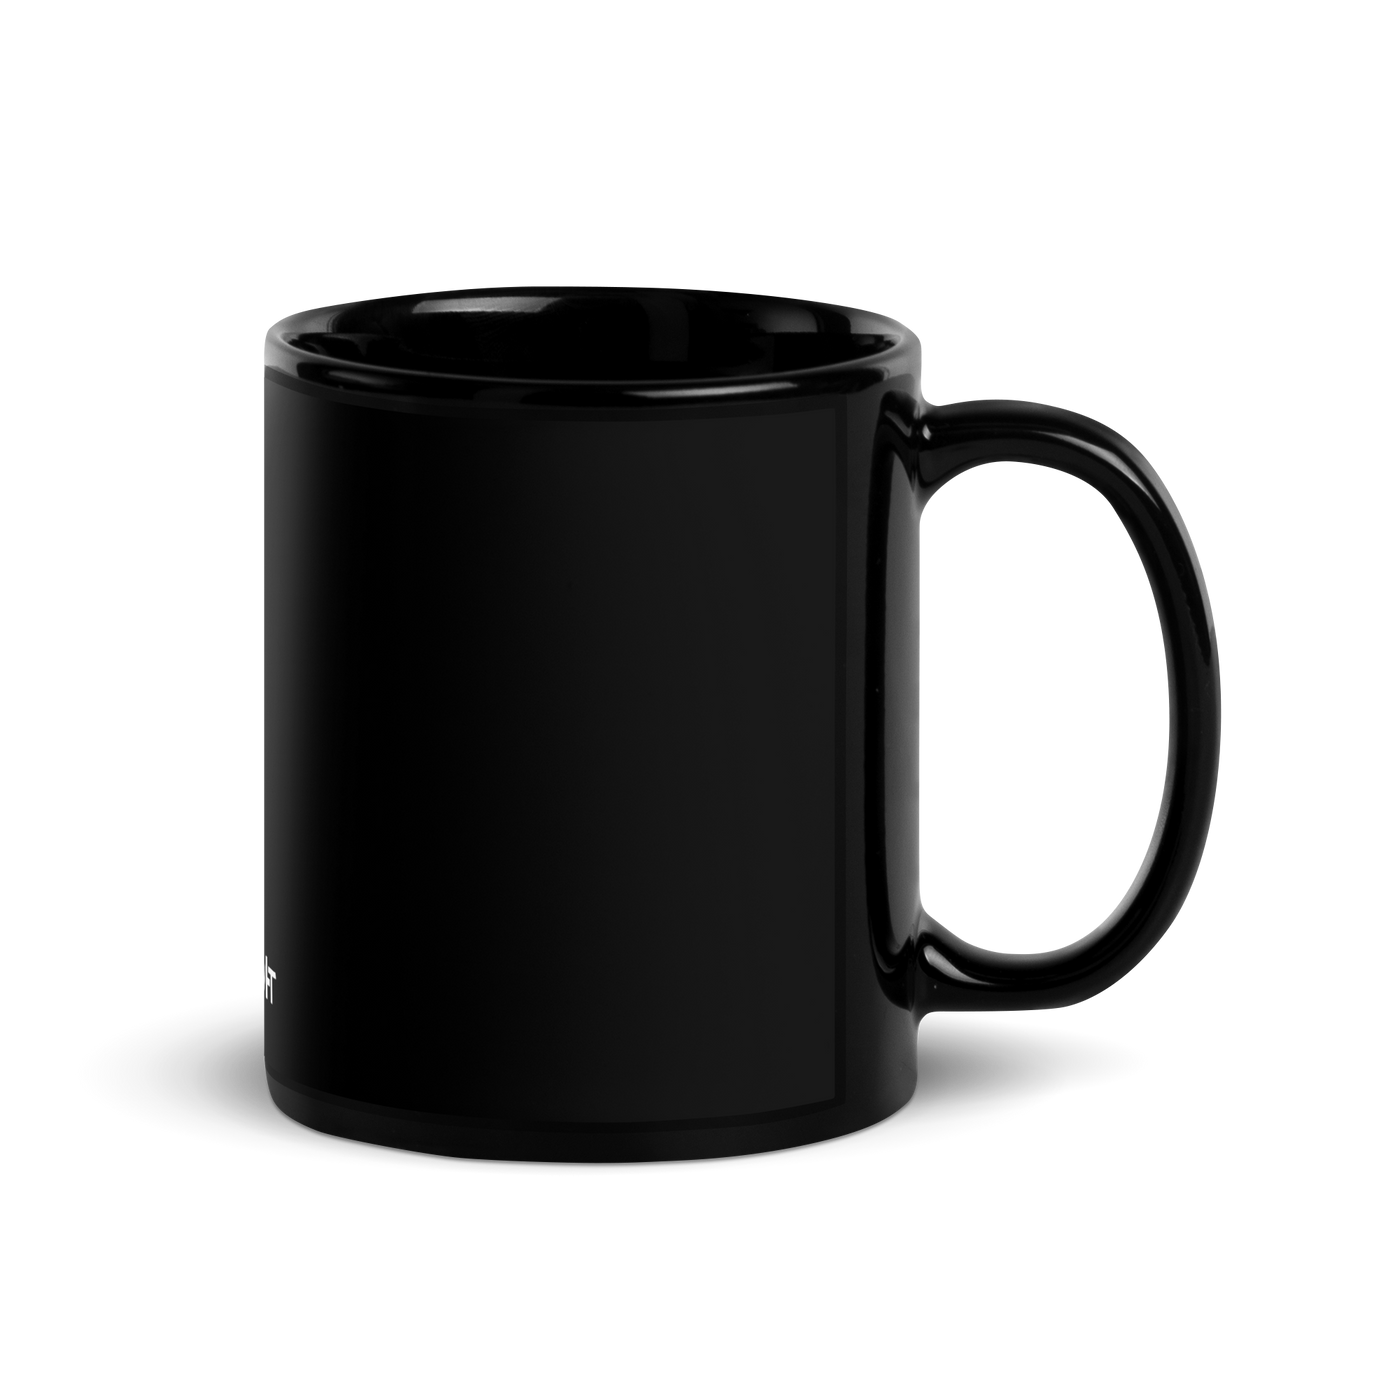 Of all the things  I've lost, I Miss my Bitcoin the most - Black Glossy Mug